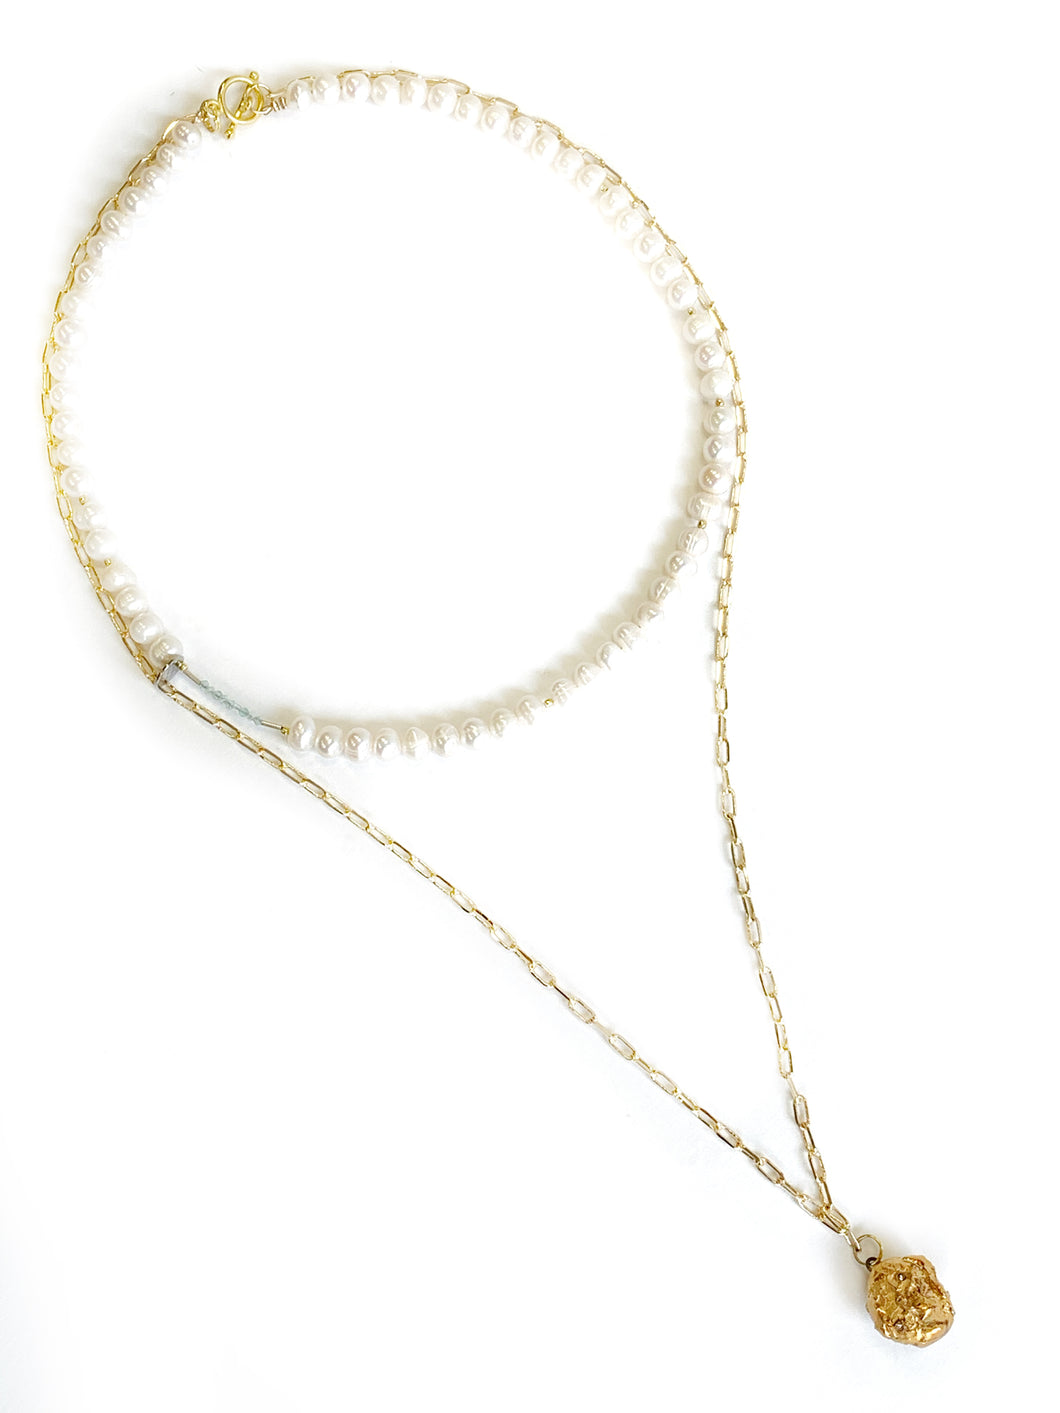 Precious and beautiful necklace - bracelet GOLDEN COCOON AND ITS PEARLS